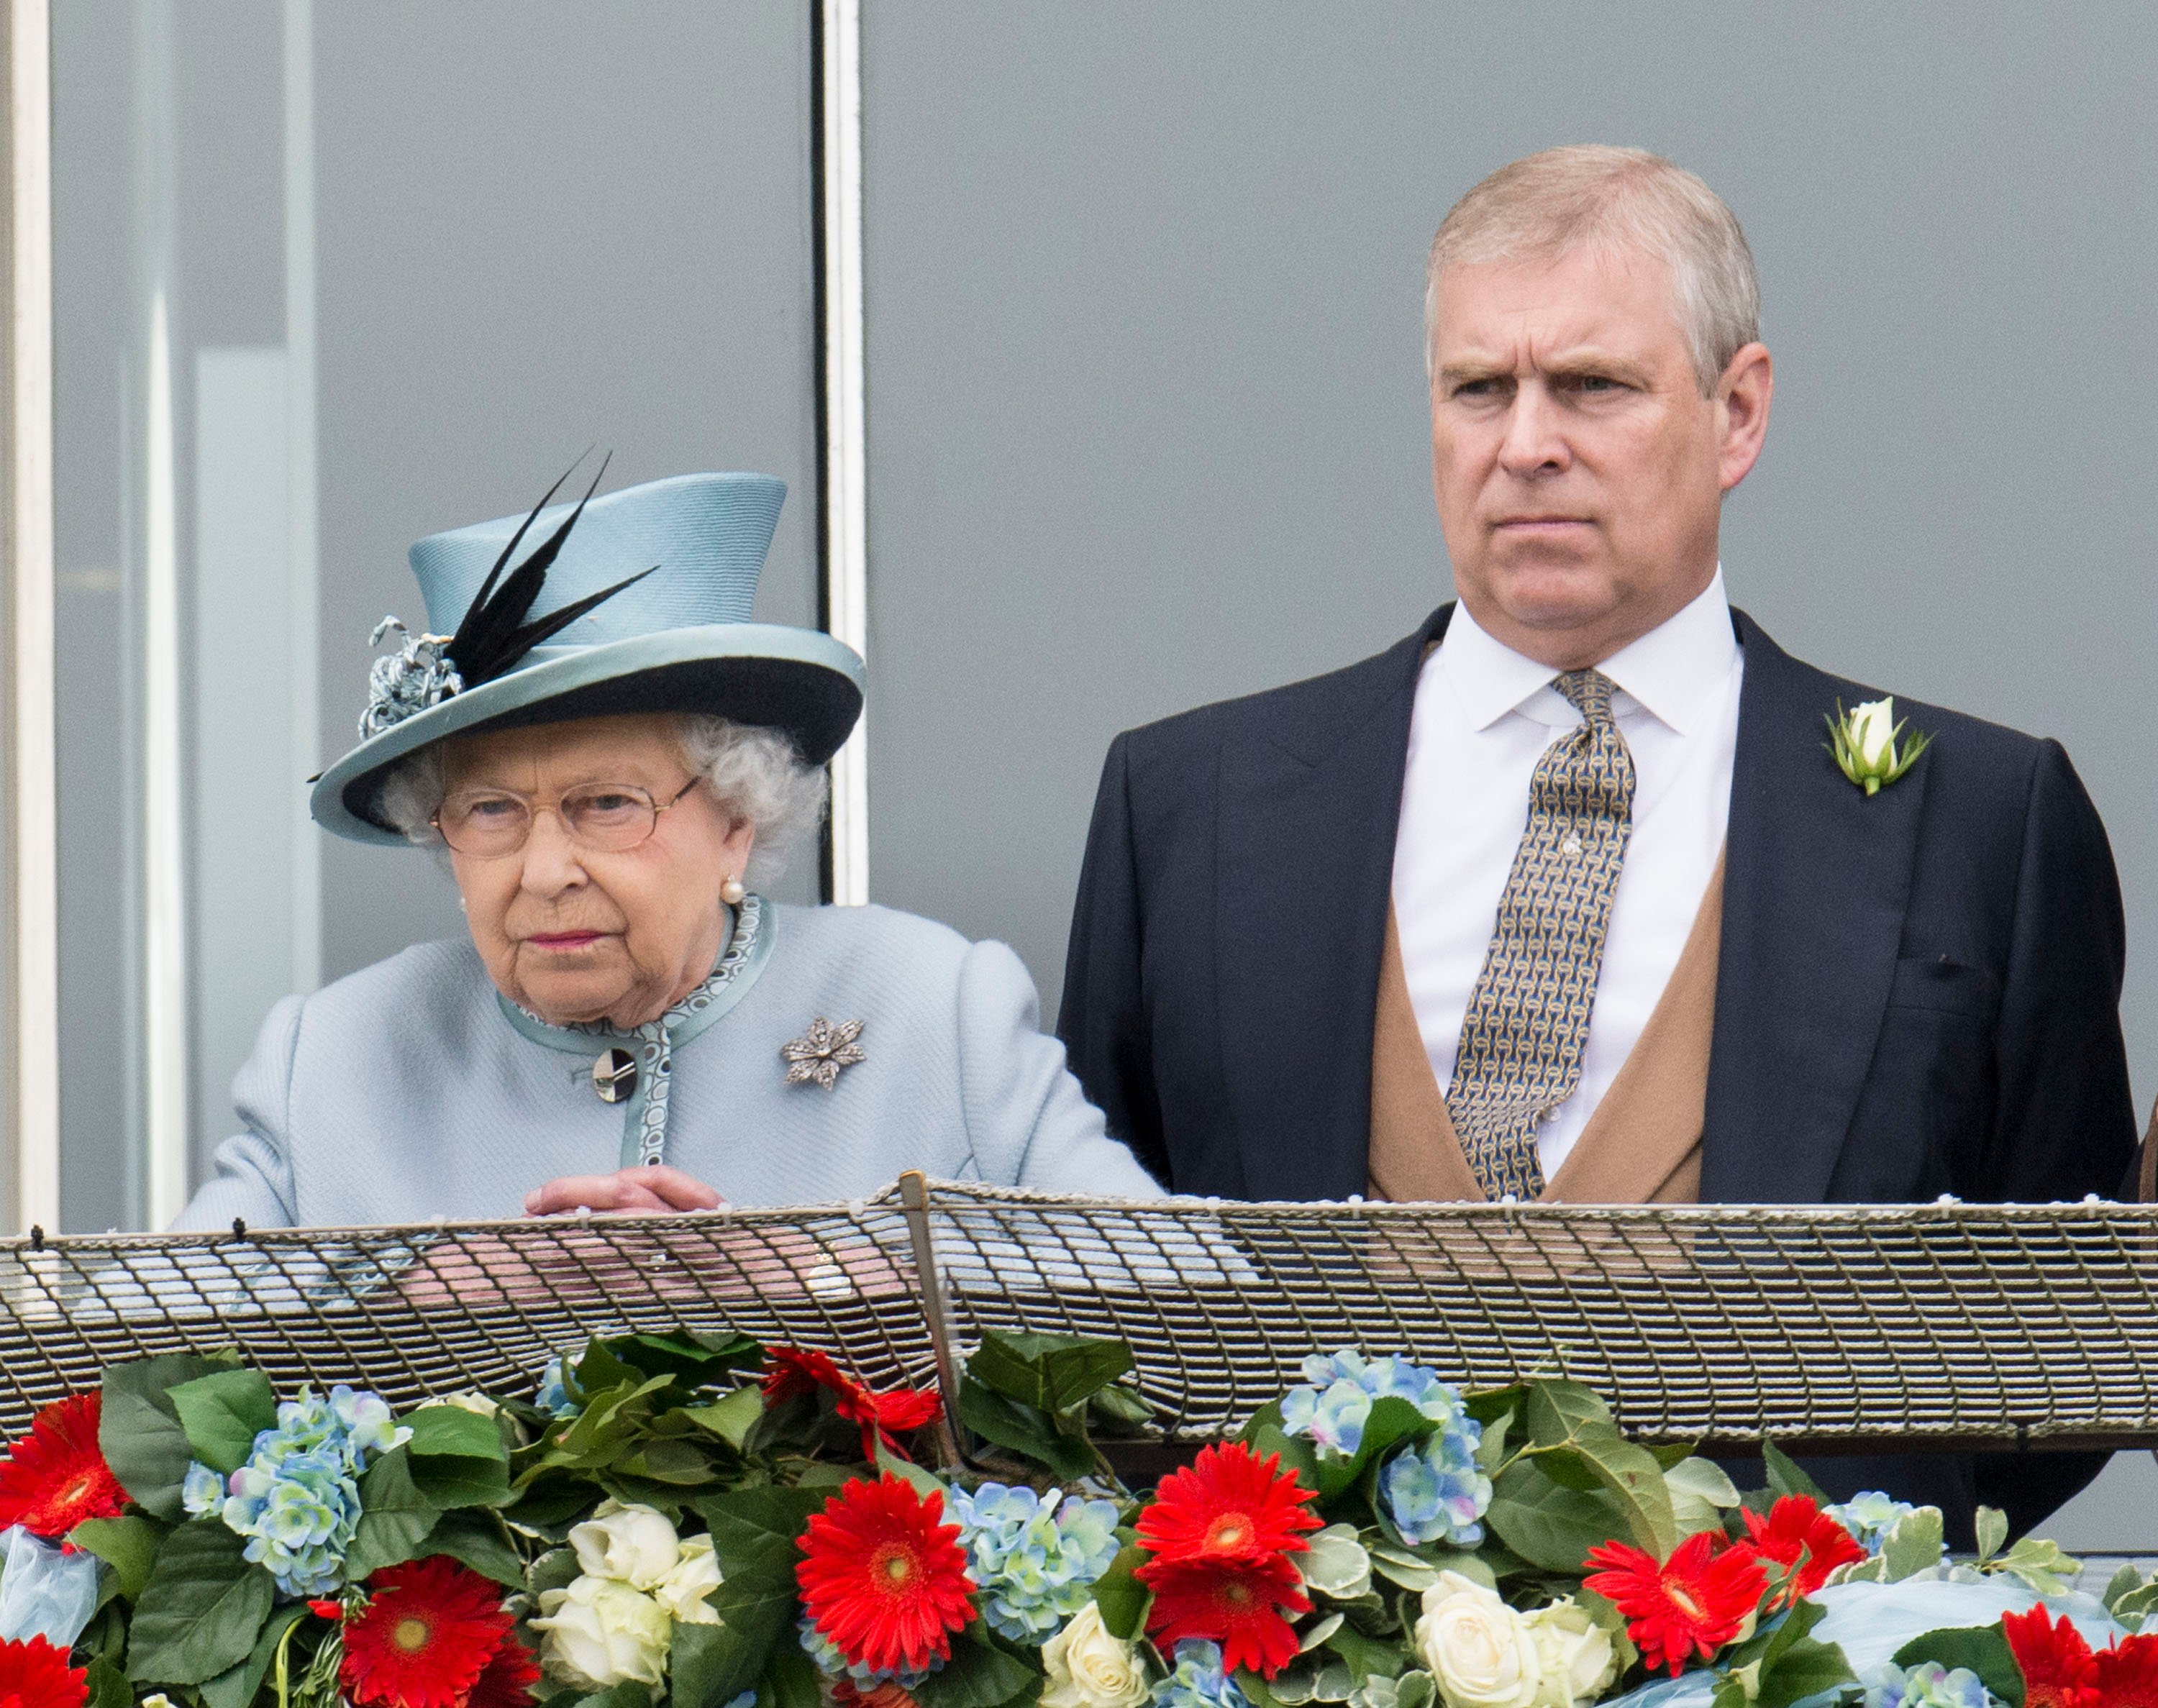 Queen Elizabeth II and Prince Andrew watching horses race at The Investec Derby Festival